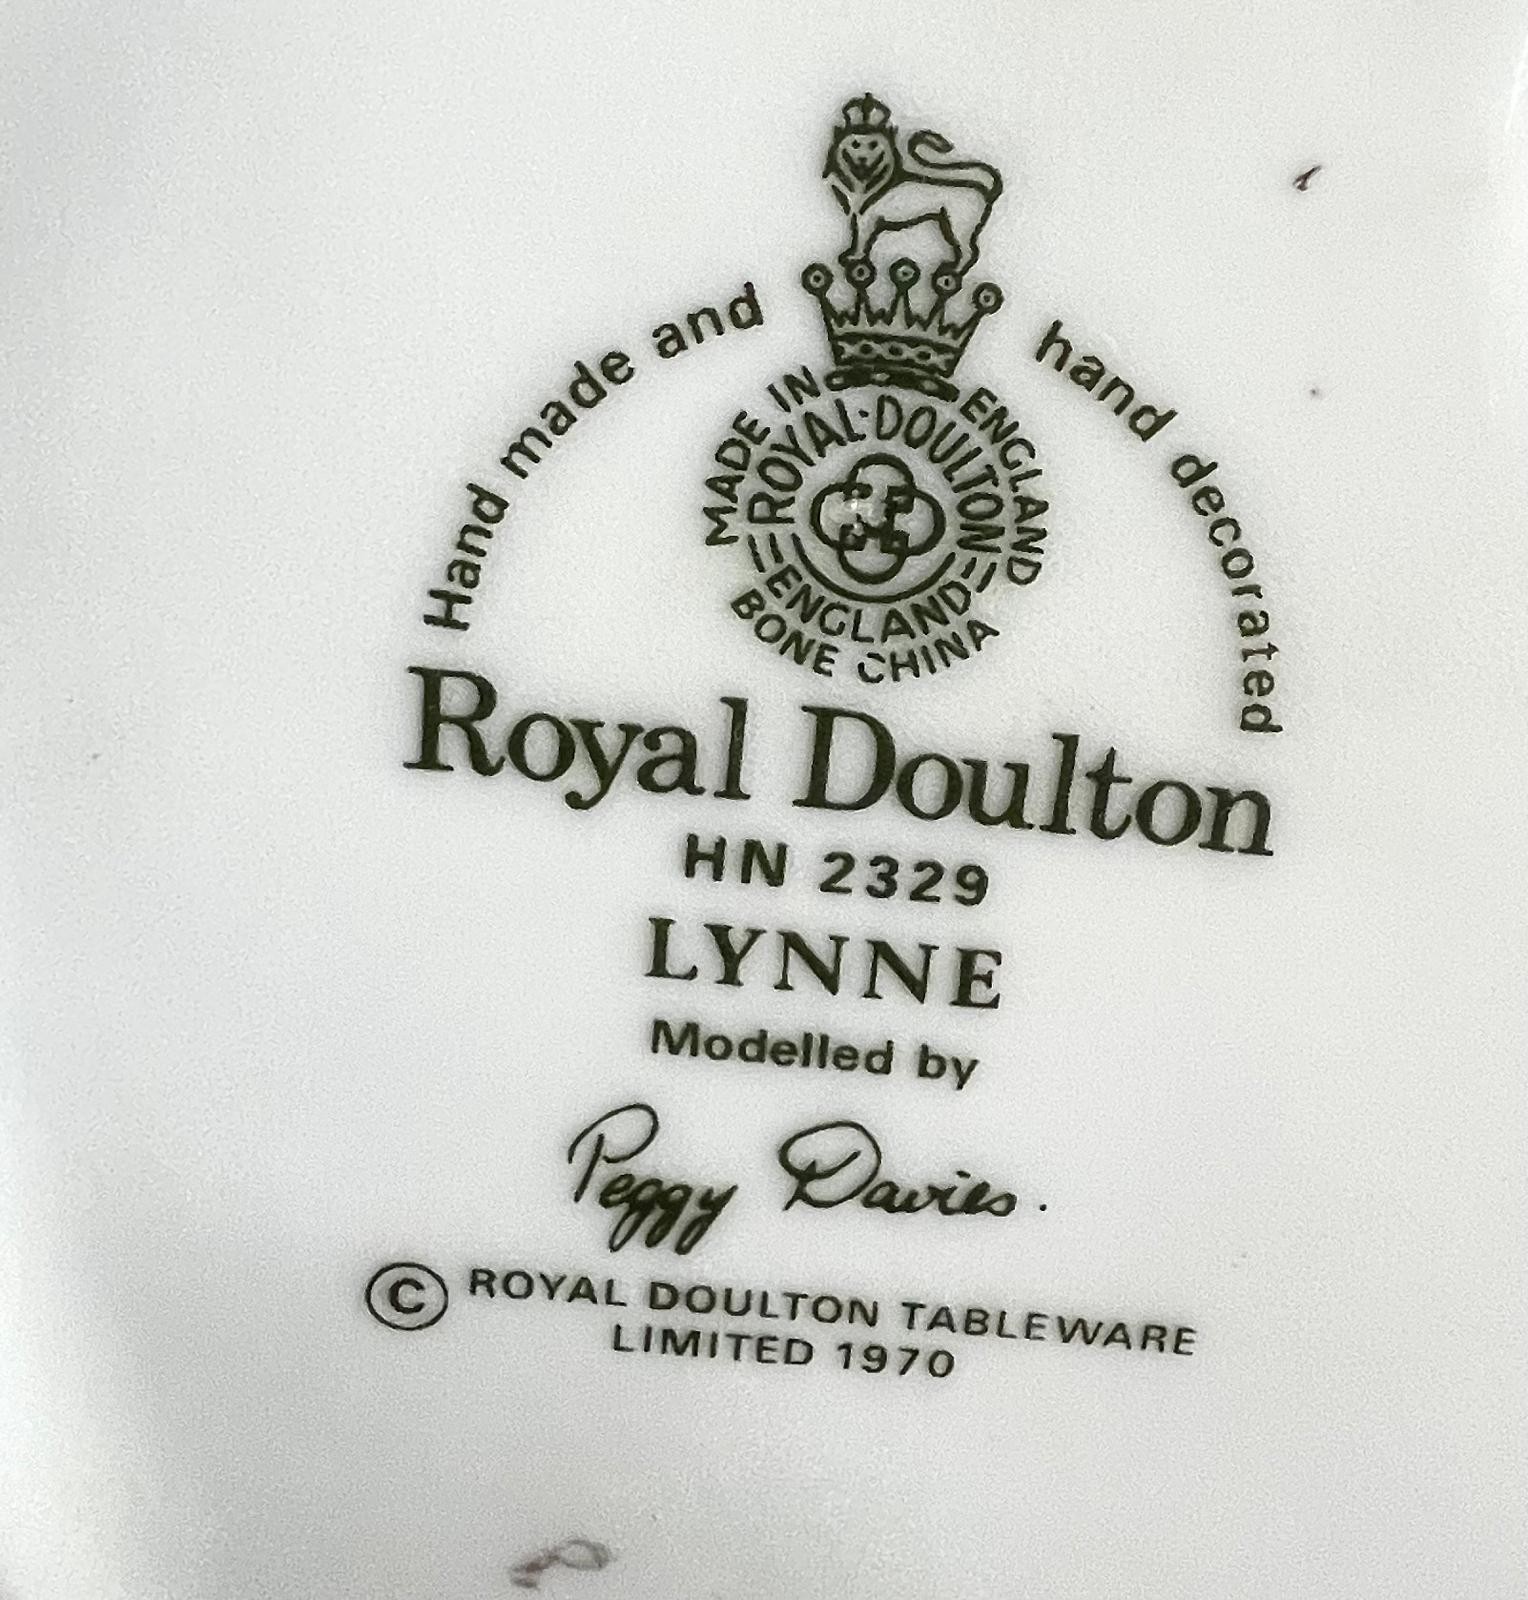 ROYAL DOULTON FIGURES BEATRICE HN3263 AND LYNNE HN2329, MODELLED BY PEGGY DAVIES, APPROX 20cm HIGH - Image 5 of 5